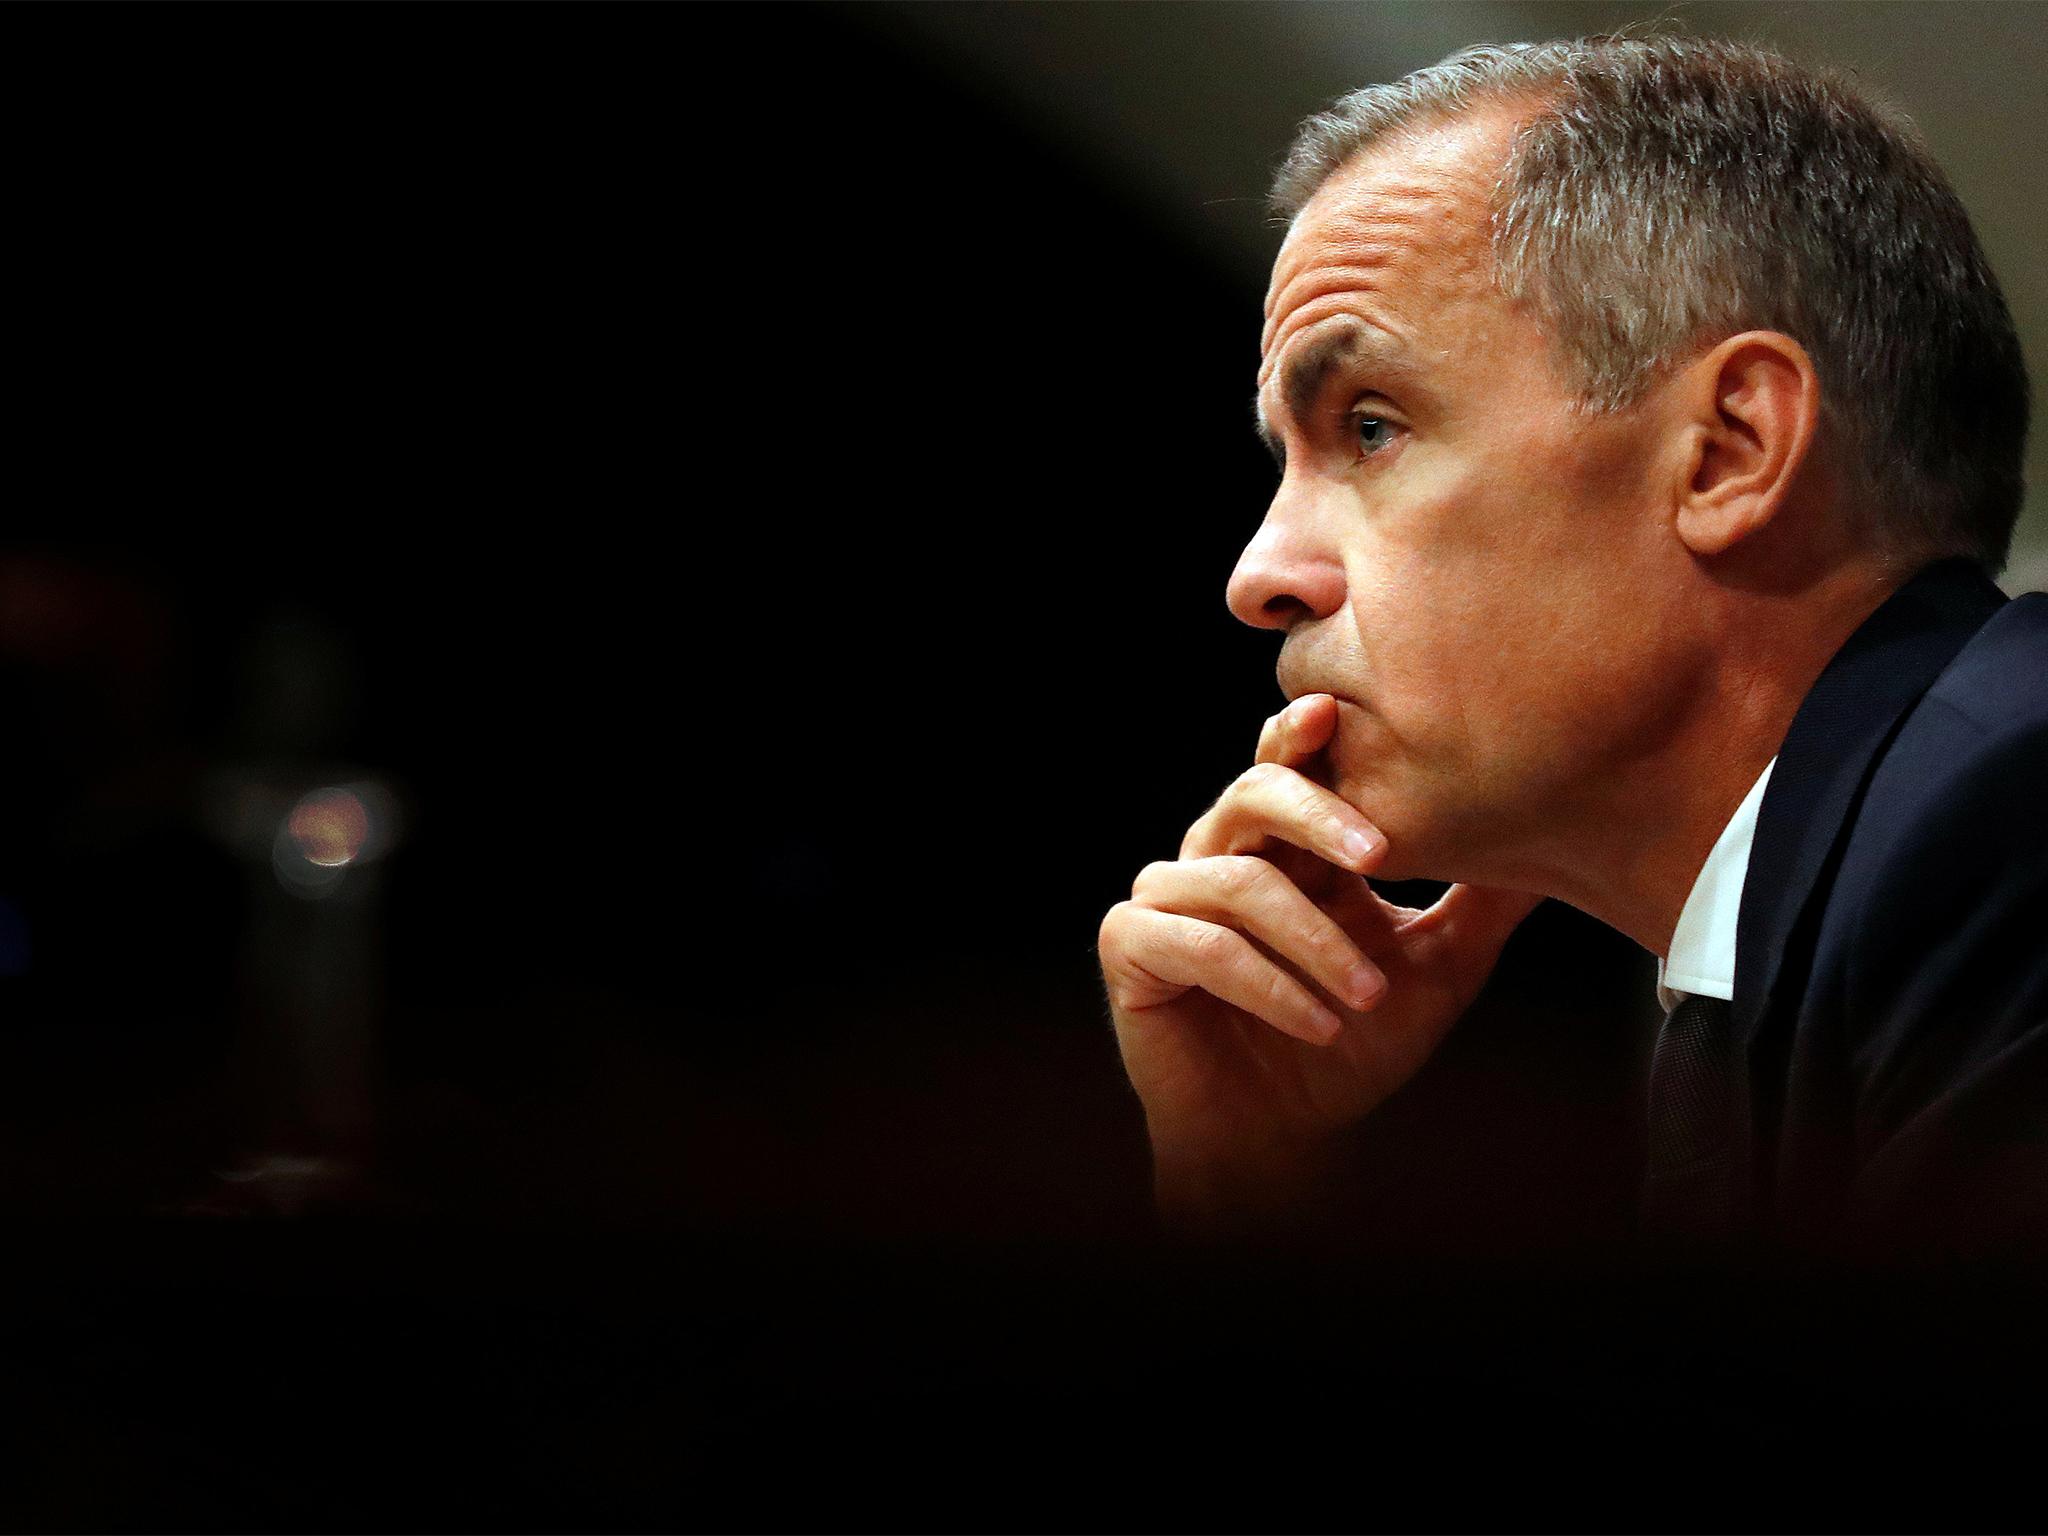 Mr Carney argues that division in society caused by capitalism should concern the Government – not the Bank of England